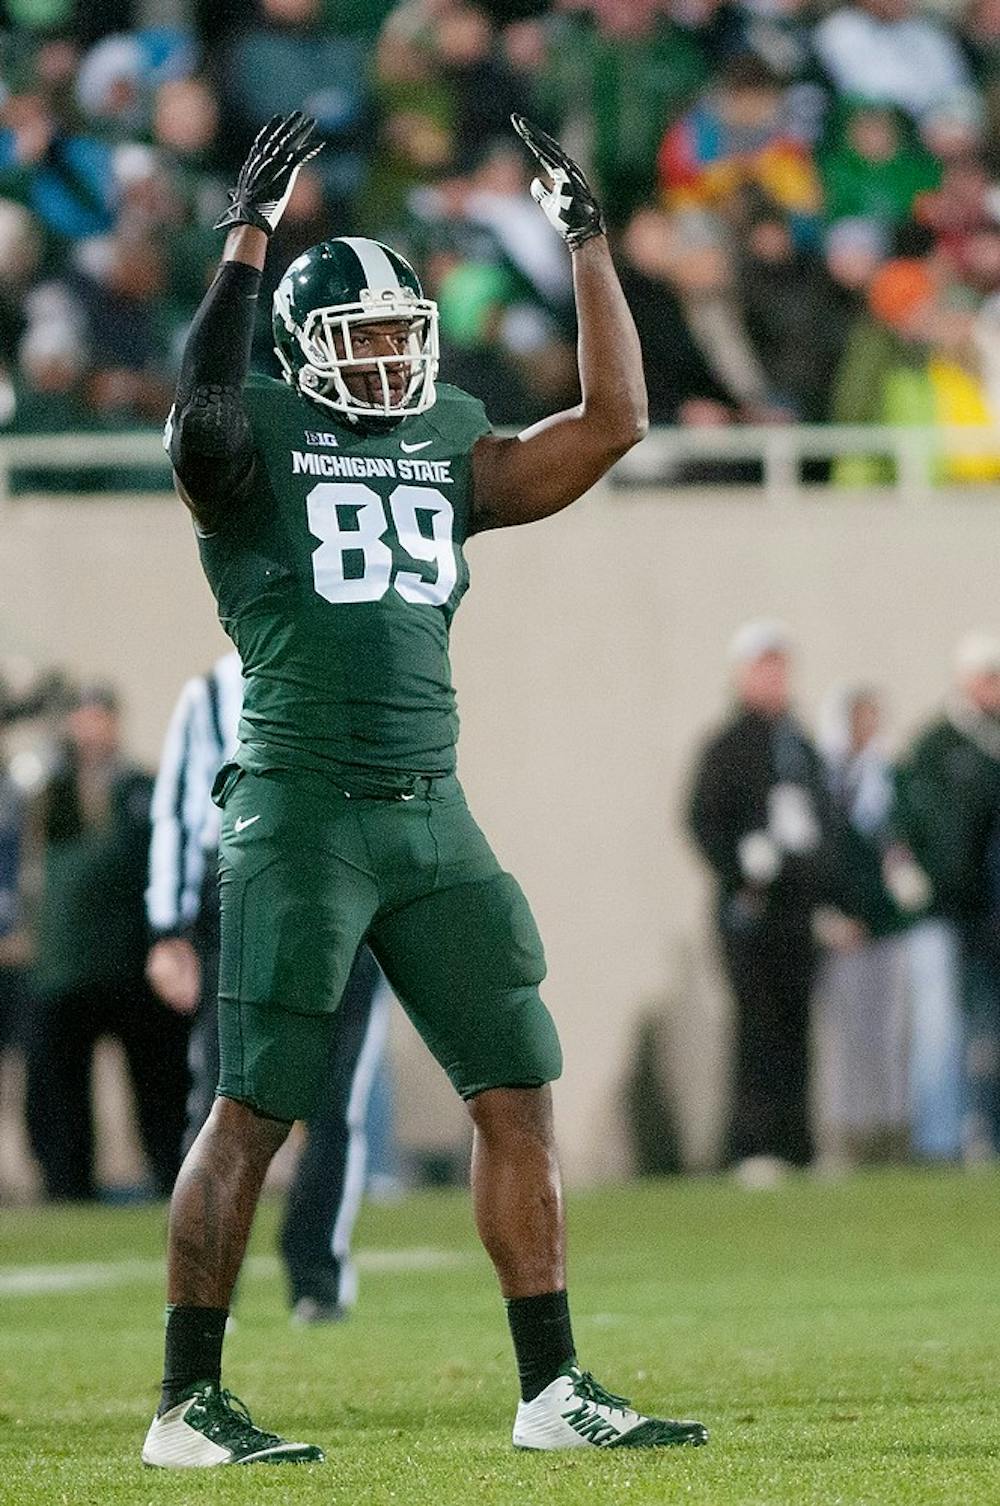 <p>Junior defensive end Shilique Calhoun raises his arms up and down to pump up the crowd during the game against Nebraska on Oct. 4, 2014, at Spartan Stadium. The Spartans defeated the Cornhuskers, 27-22. Jessalyn Tamez/The State News</p>